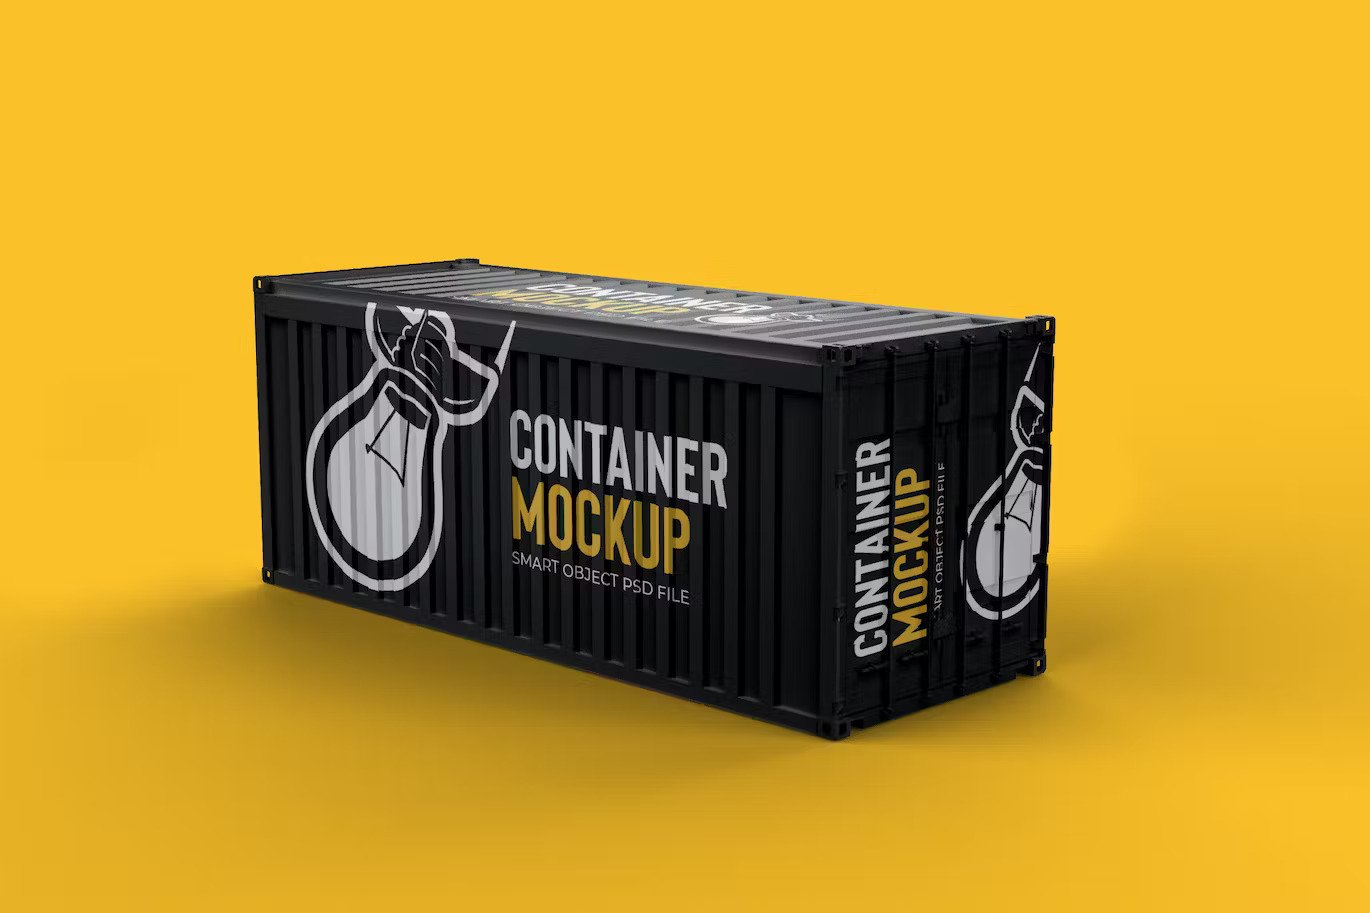 A cargo container mockup